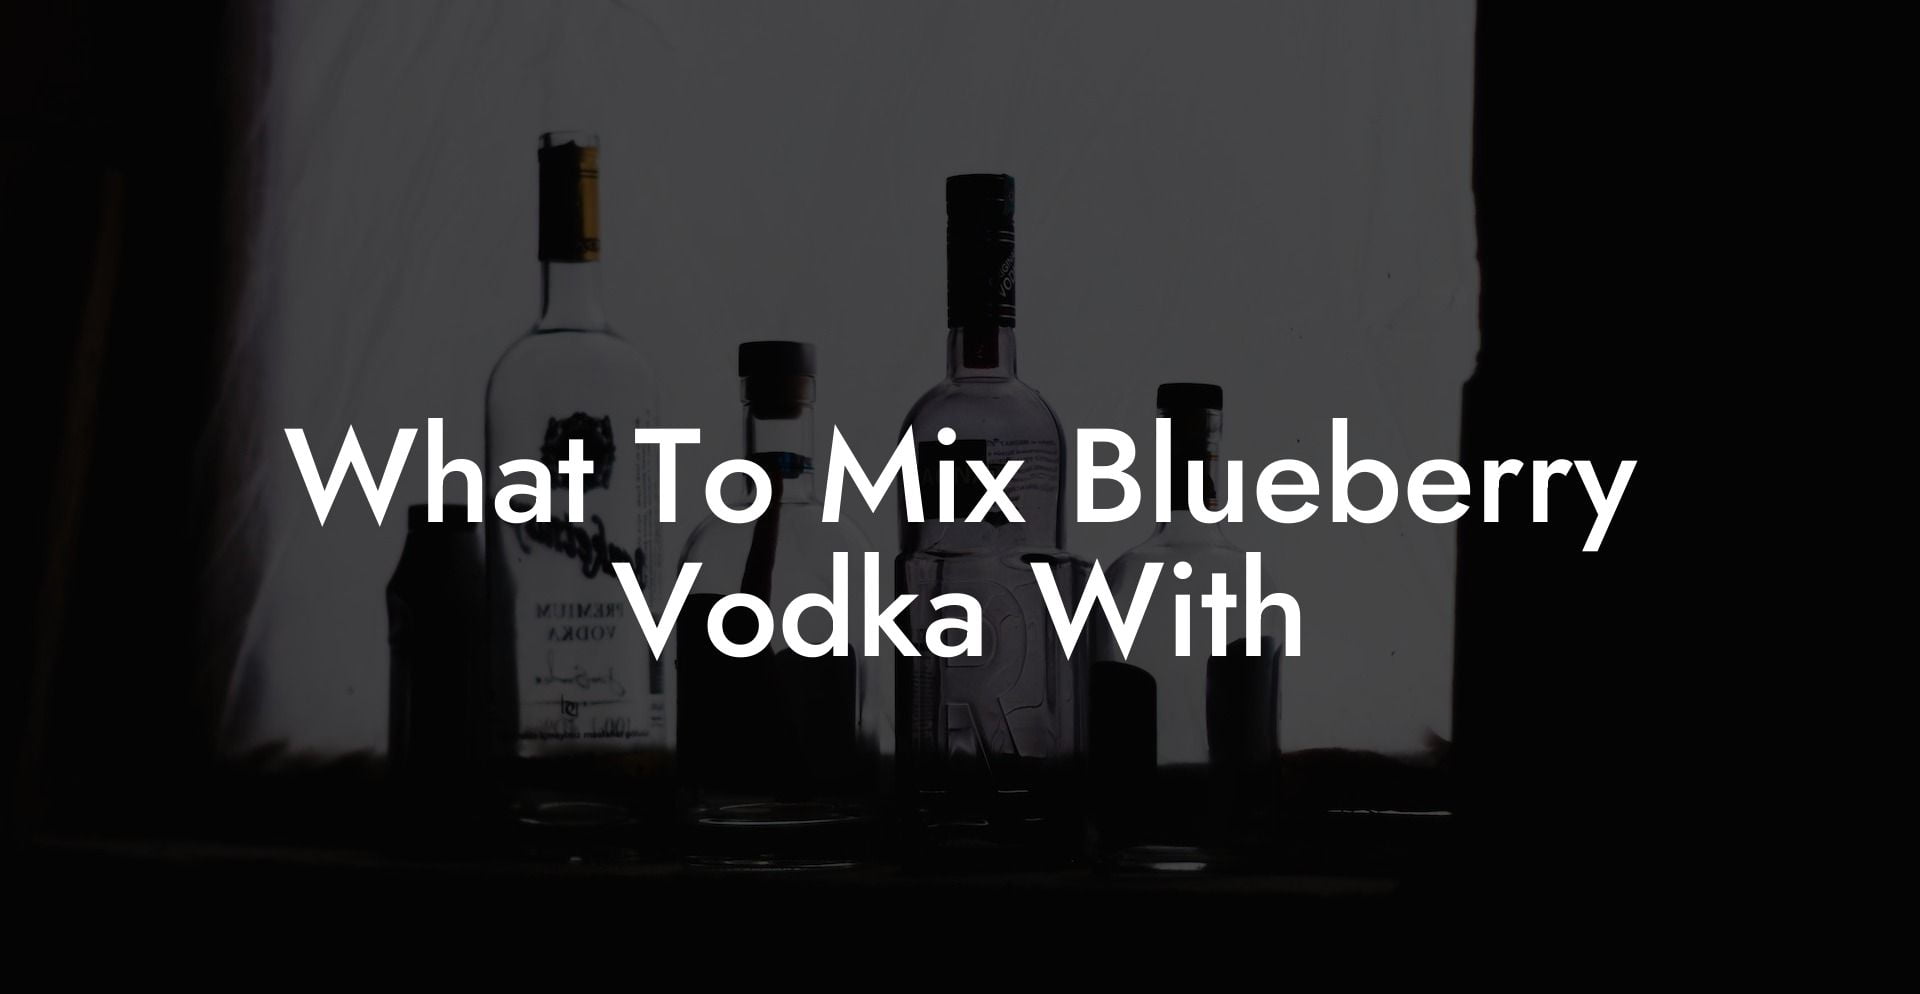 What To Mix Blueberry Vodka With